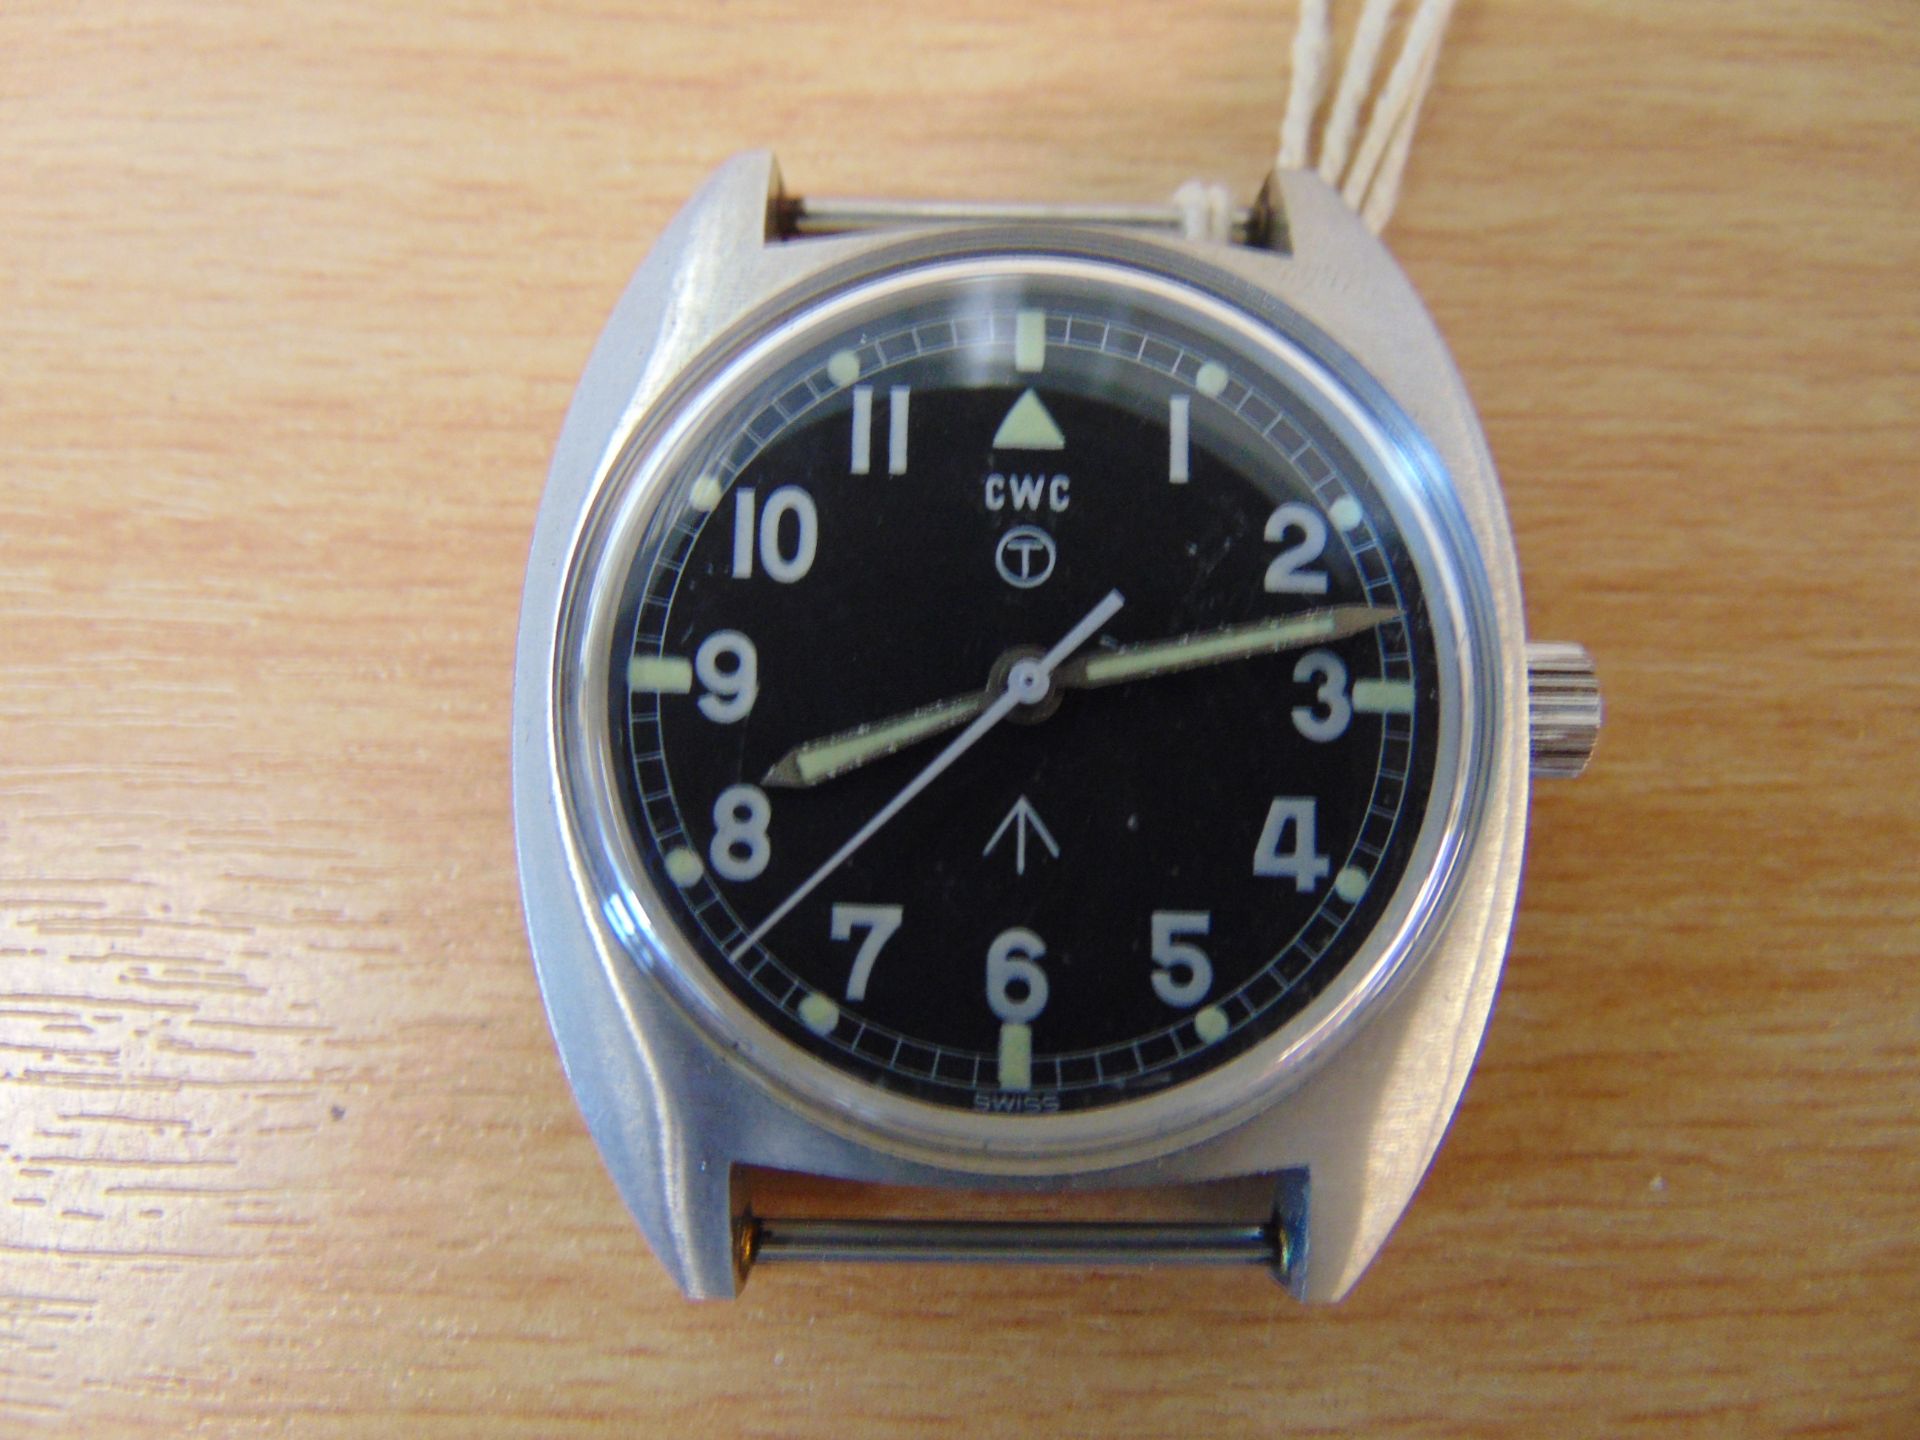 UNBELIEVABLE NEW AND UNISSUED CWC W10 Service Watch Mechanical Movement Nato Marks - Image 2 of 4